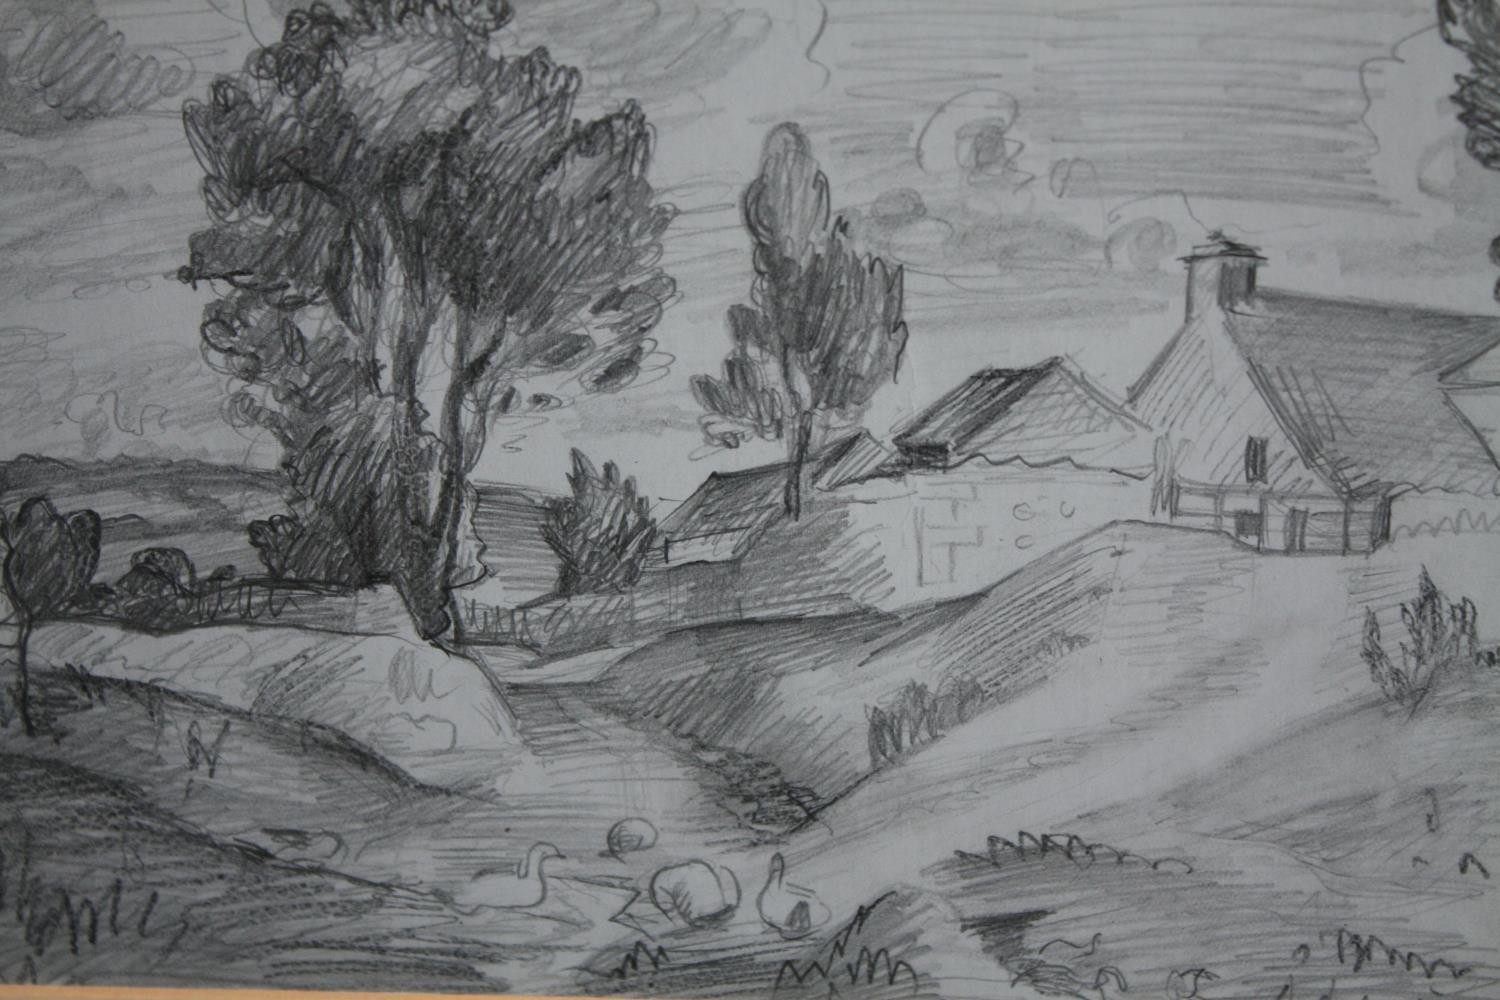 Pencil drawing. Rural study. Signed lower right 'R.H.'. Framed and glazed. H.48 W.42 cm.